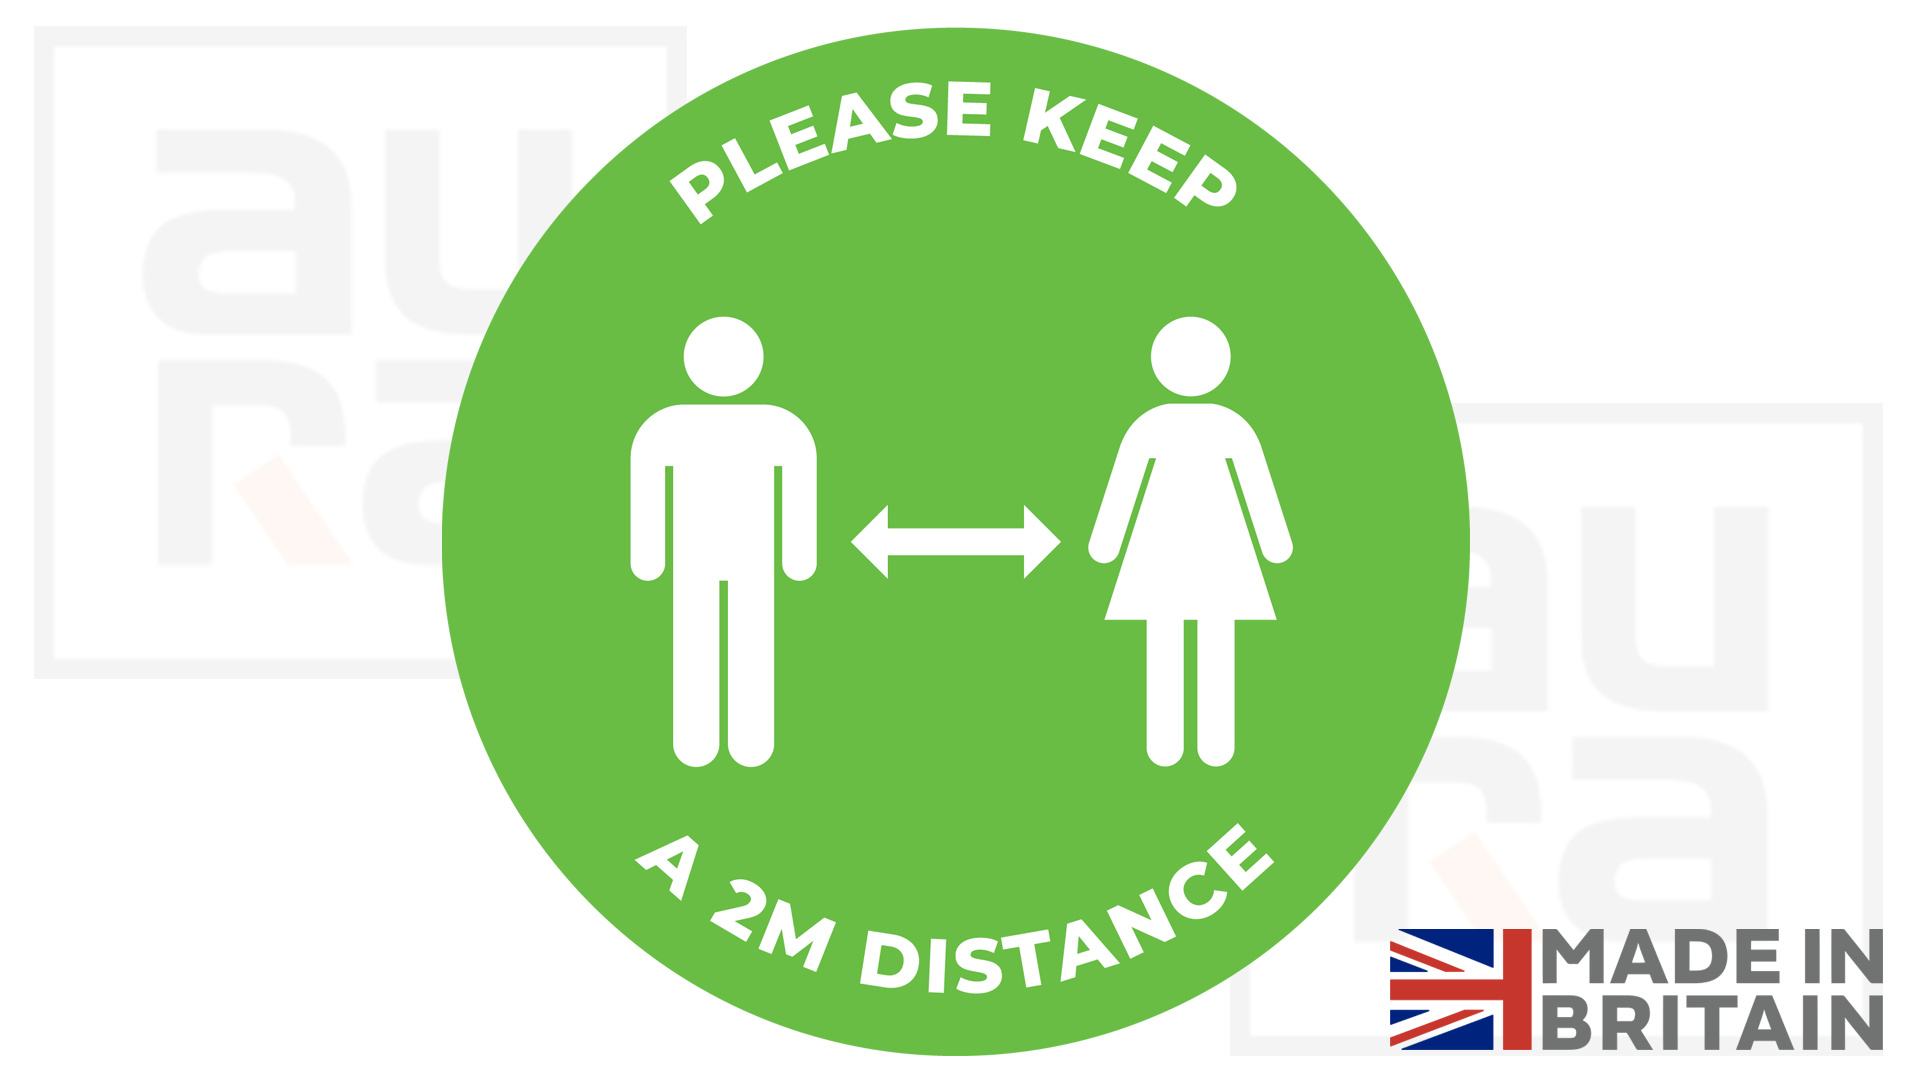 Please keep a 2m distance covid19 social distance shop floor sticker for business